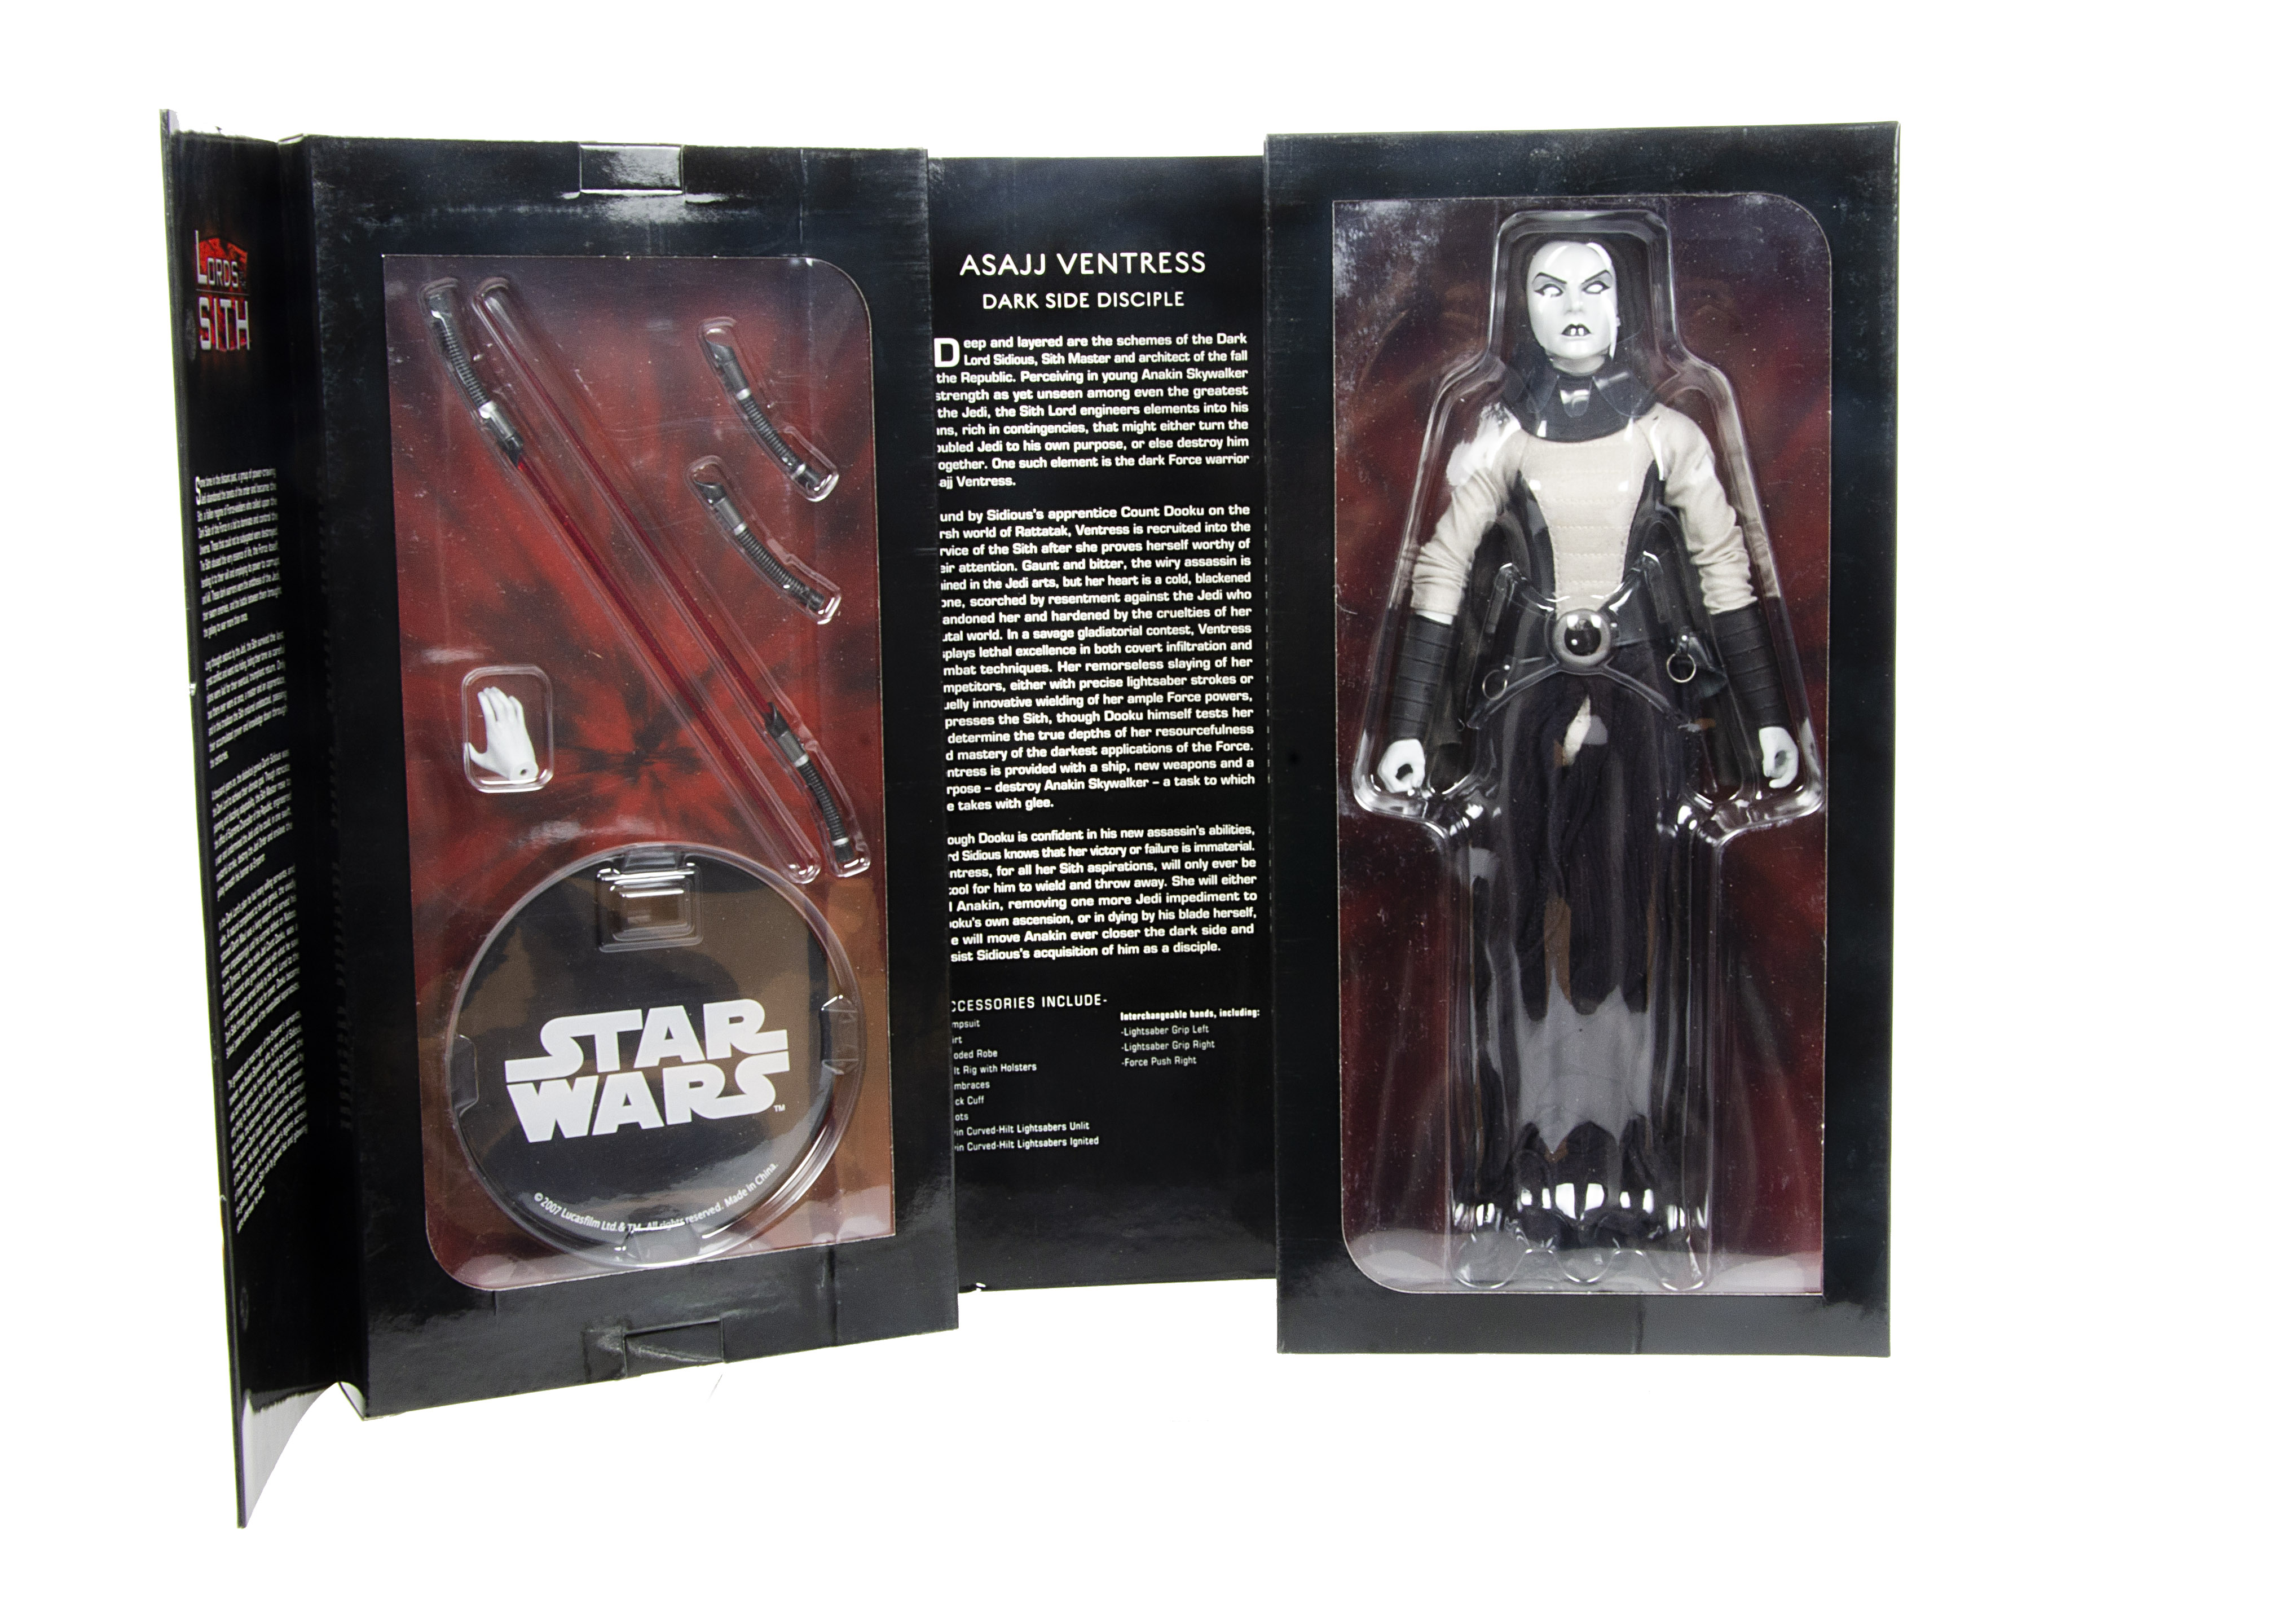 Star Wars Sideshow Collectibles I:6 Asajj Ventress Figure, Dark Side Disciple, Lords Of The Sith - Image 2 of 2